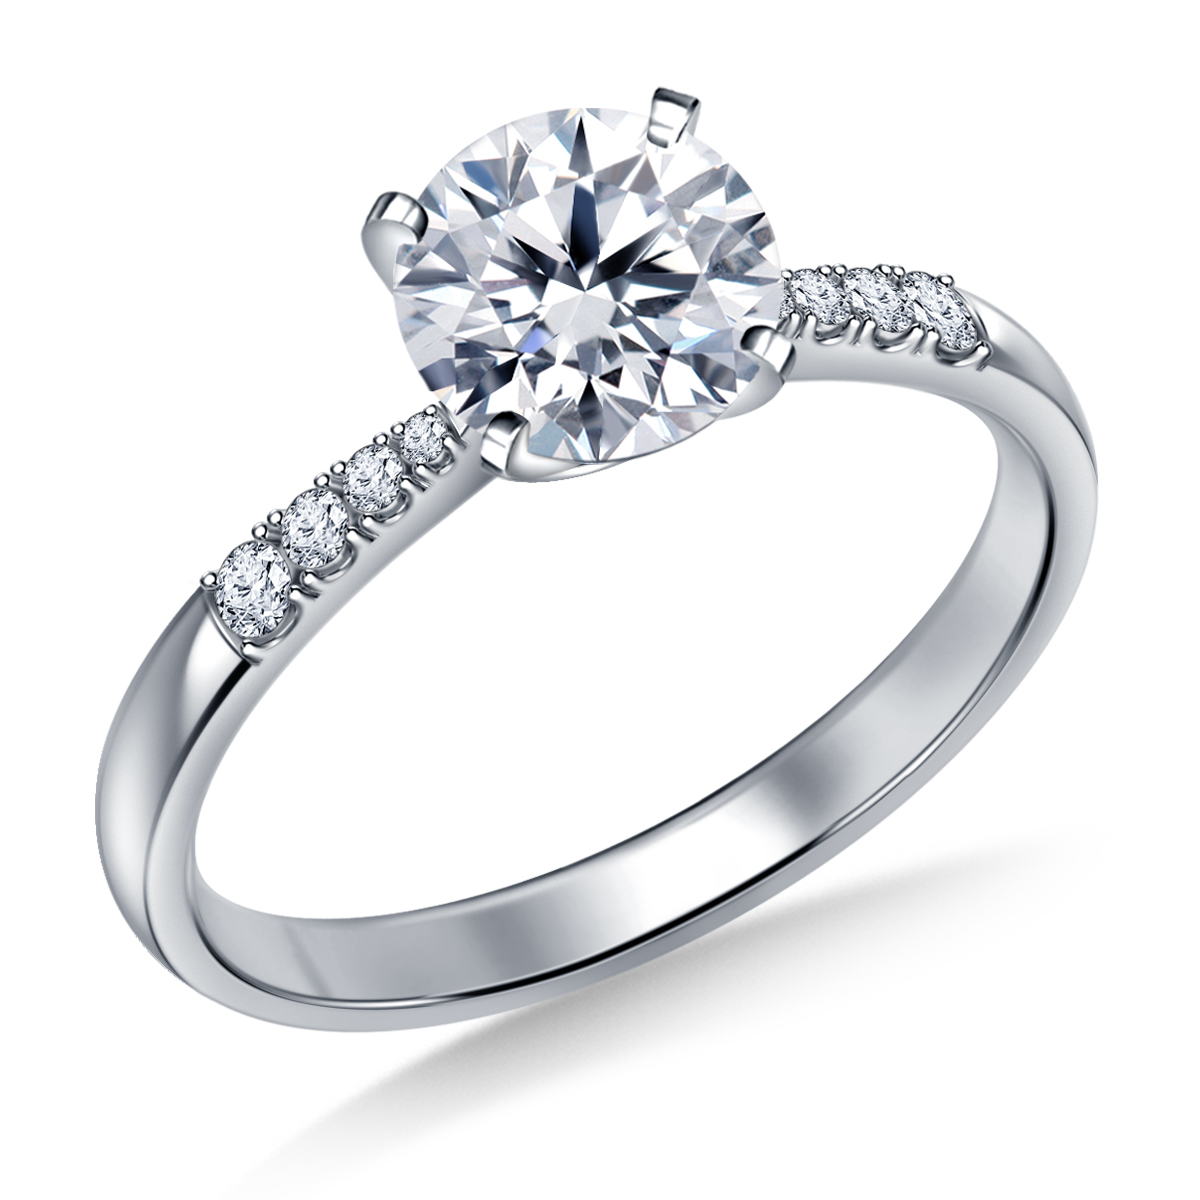 Petite Solitaire Engagement Ring Semi Mount with Micro Prong Accent Diamonds in 14K White Gold